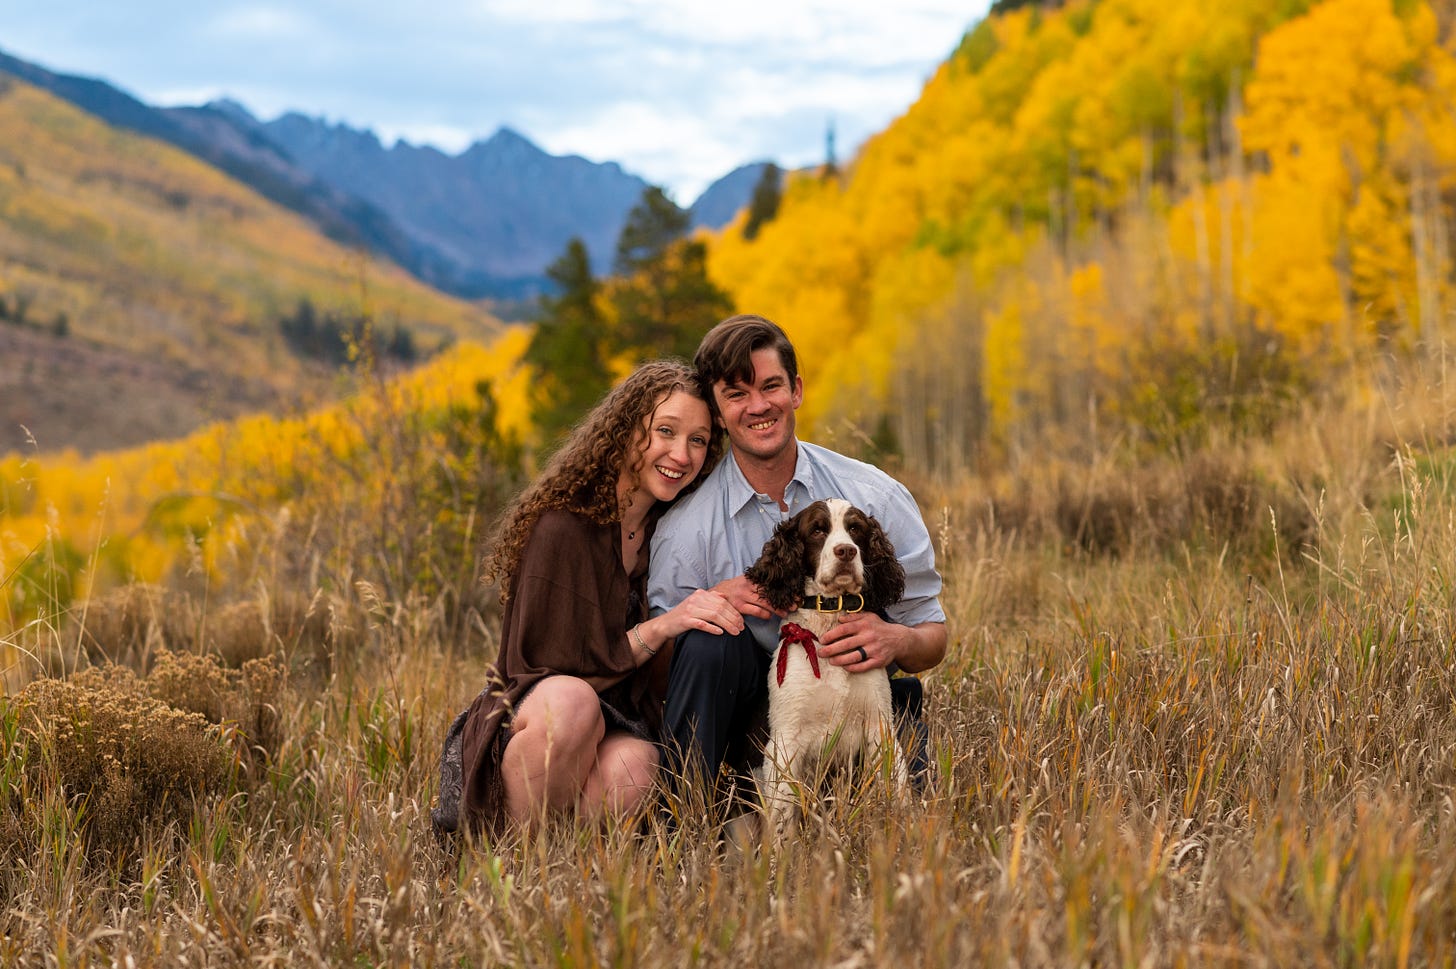 Family portrait set in the rocky mountains